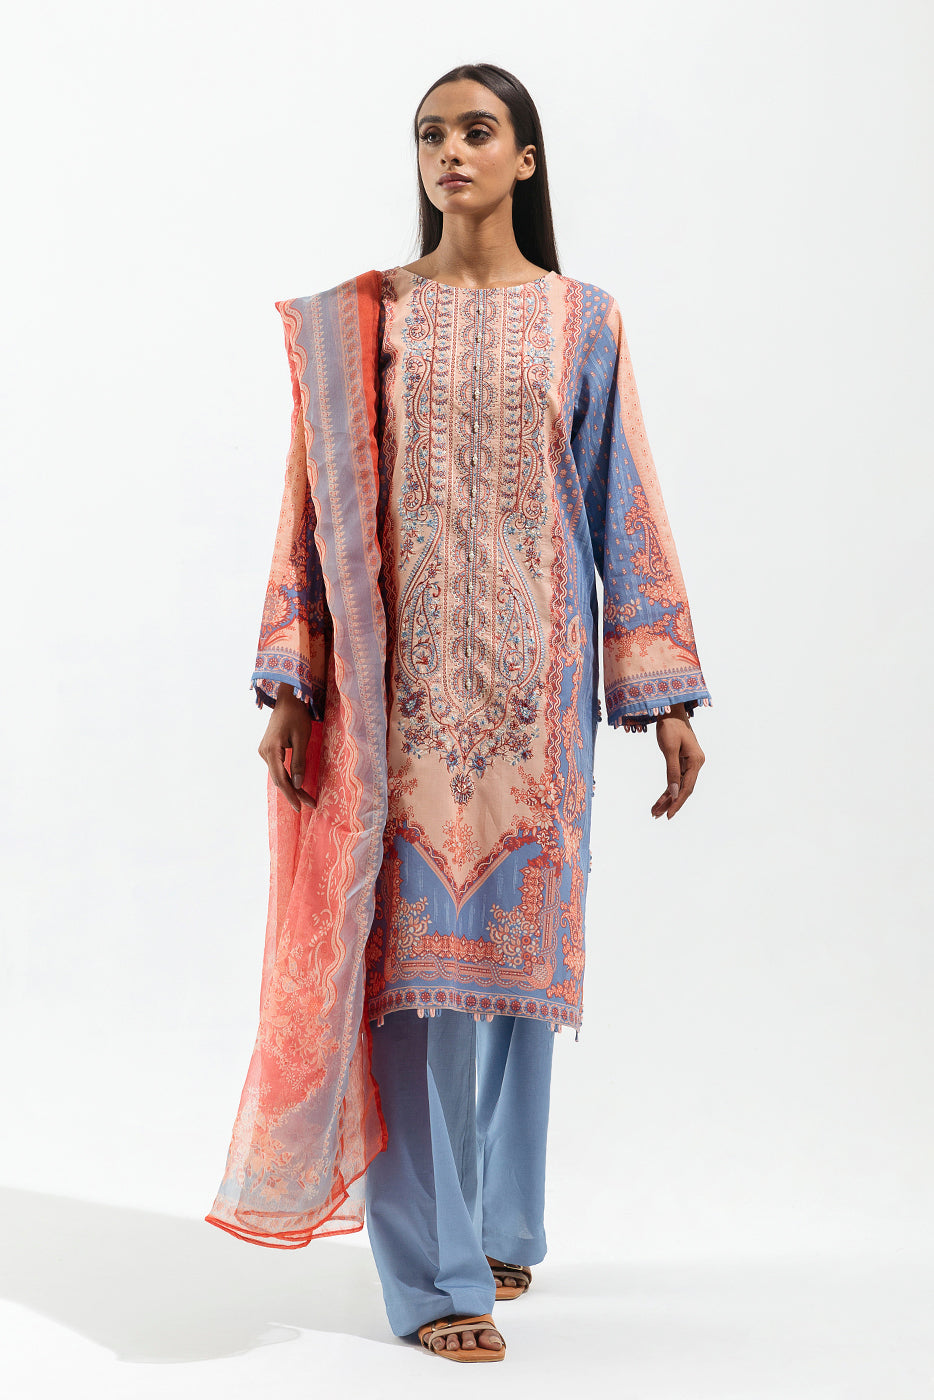 2 PIECE - EMBROIDERED LAWN SUIT - CERULEAN TANGERINE (UNSTITCHED) - BEECHTREE